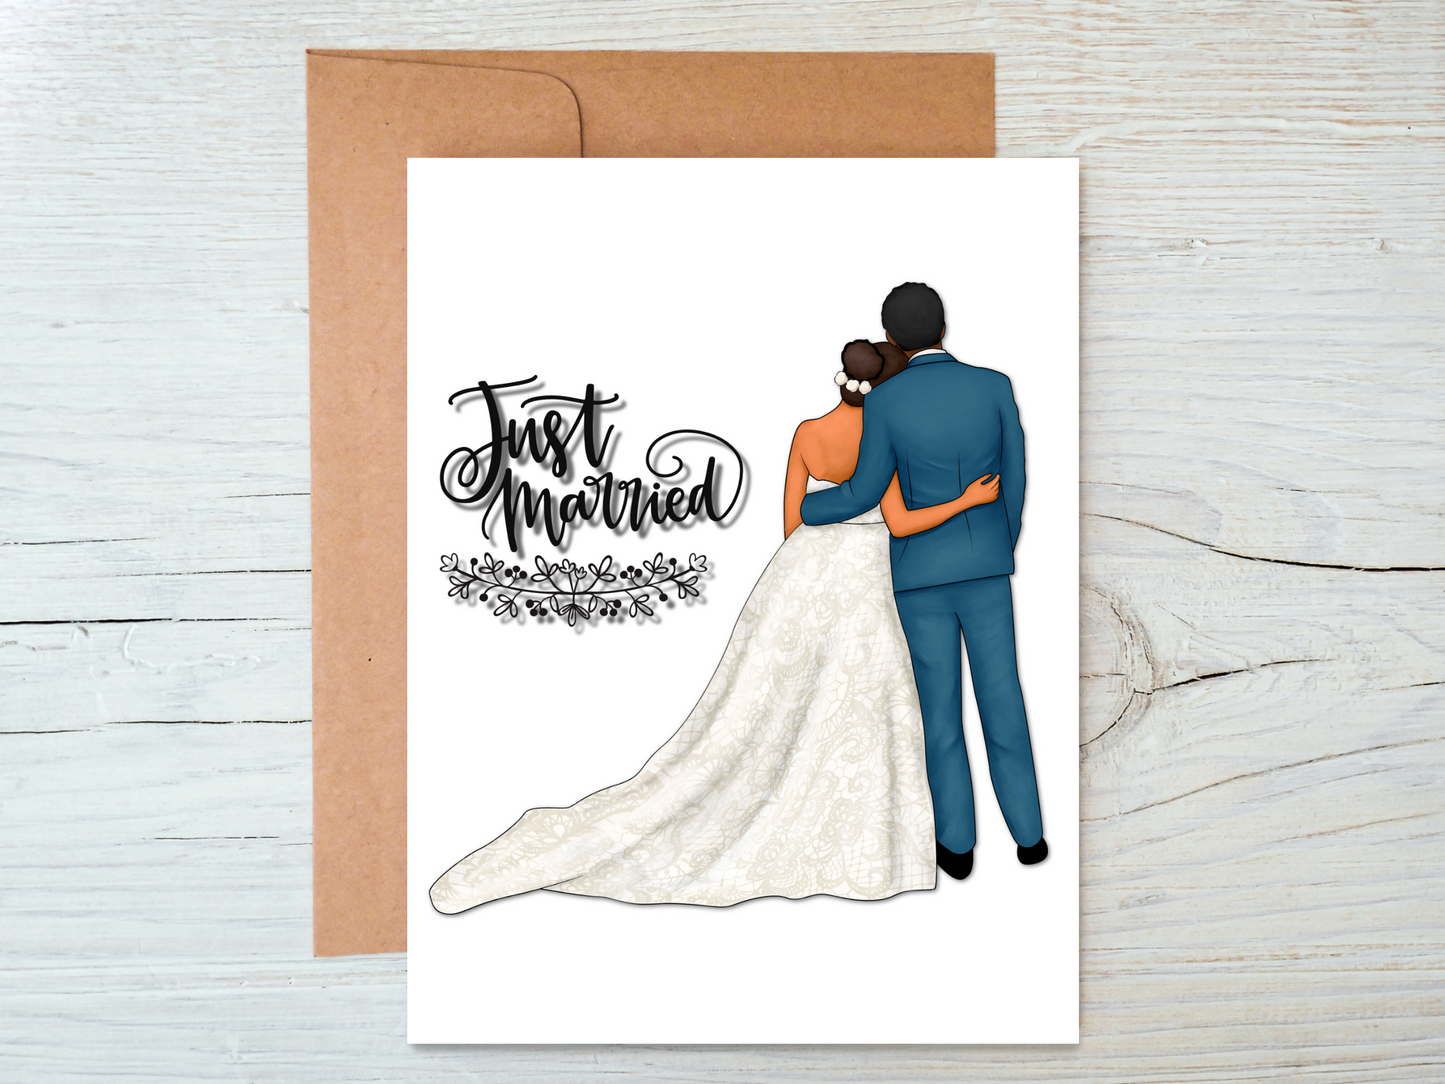 Just Married Black Couple Interracial Couples Newlywed Cards for Weddings